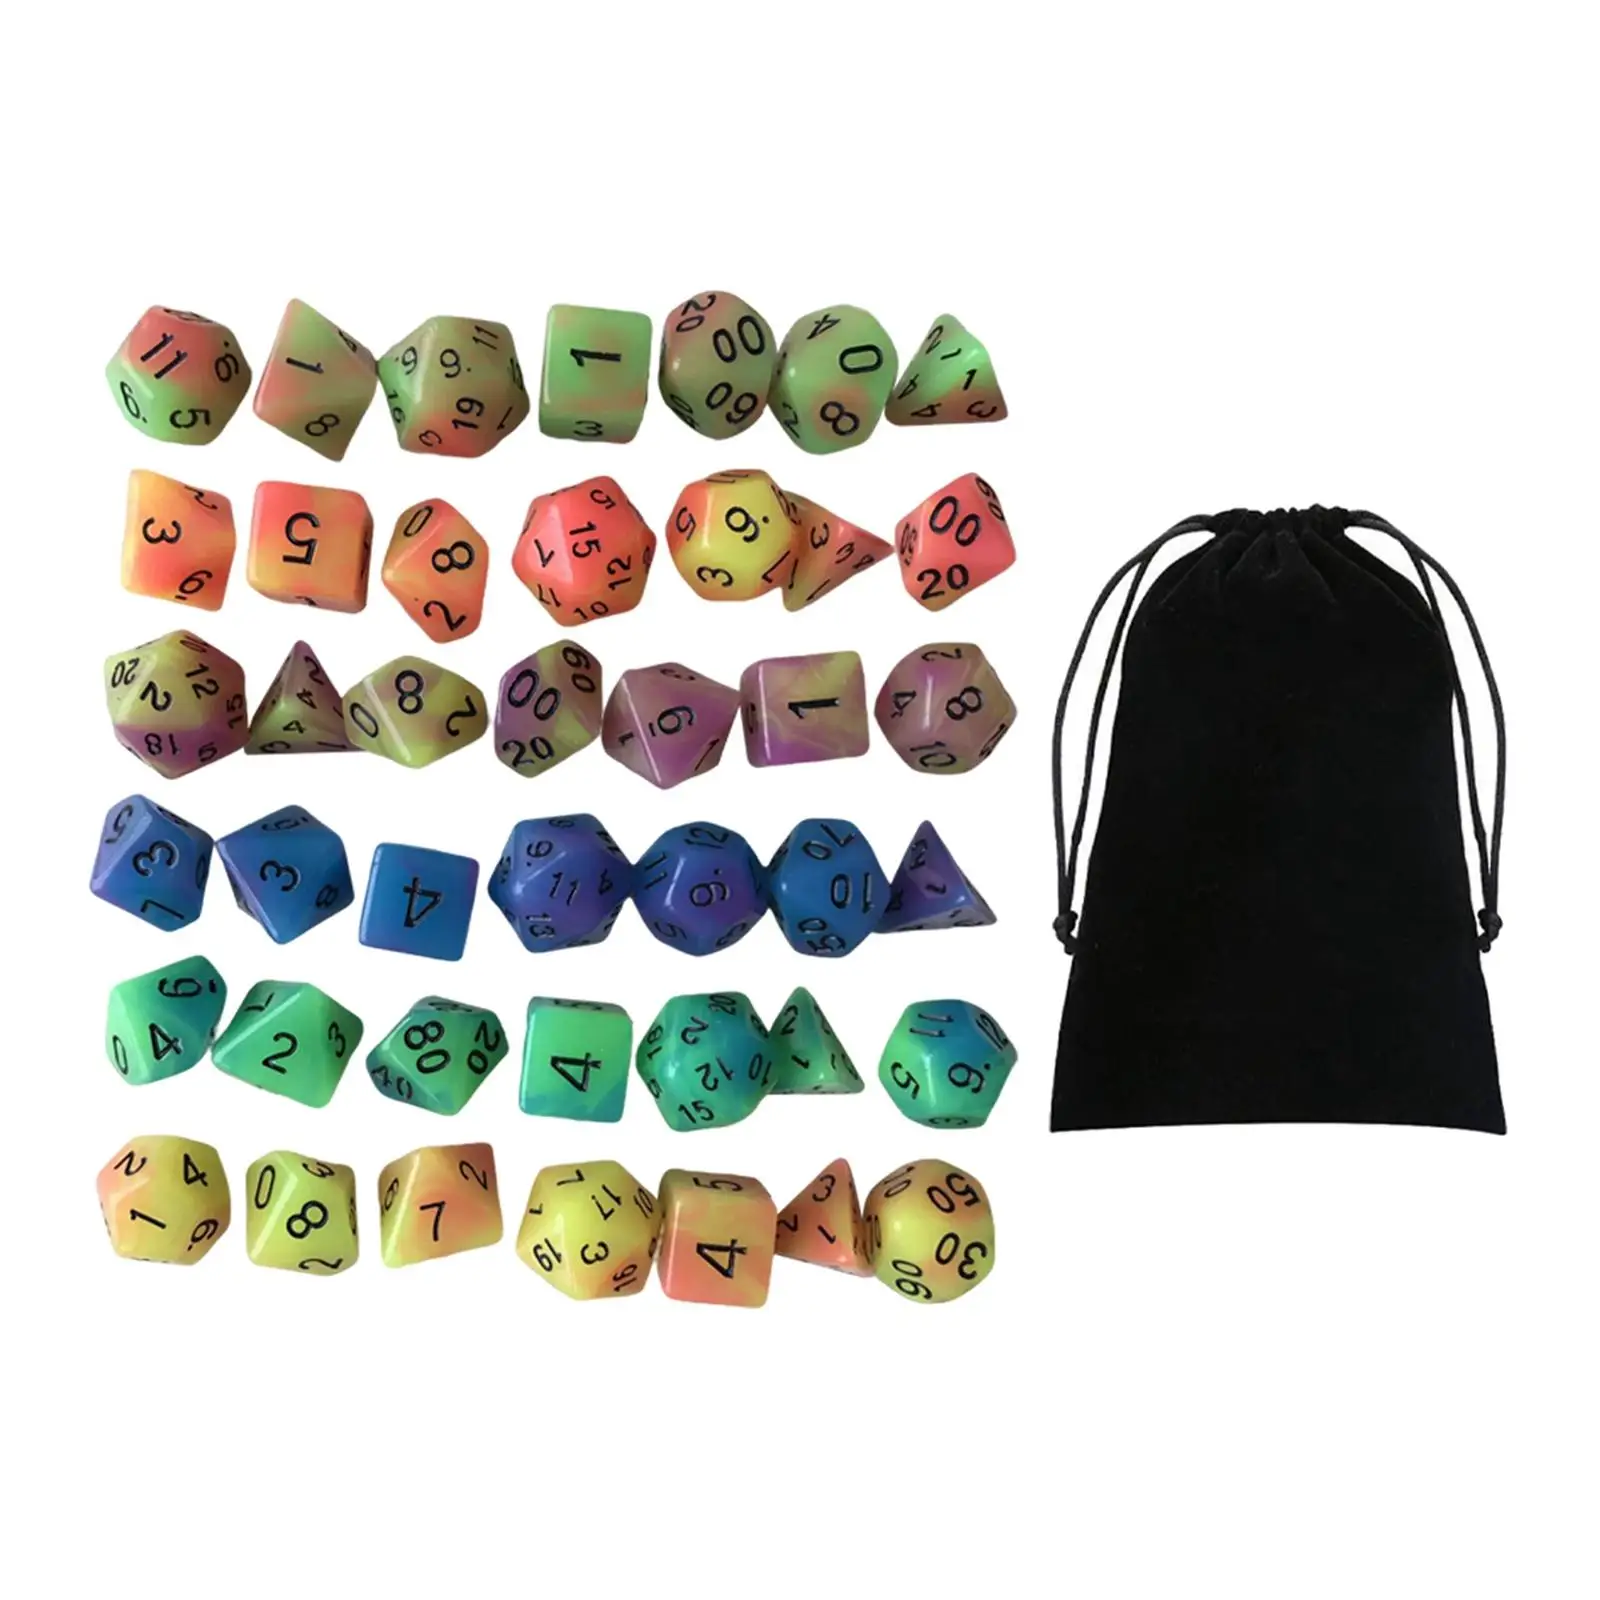 Pack of 42 Luminous RPG Dices Set D8 D10 D12 D20 Party Toys Glowing Polyhedral Dices Set for DND Math Teaching